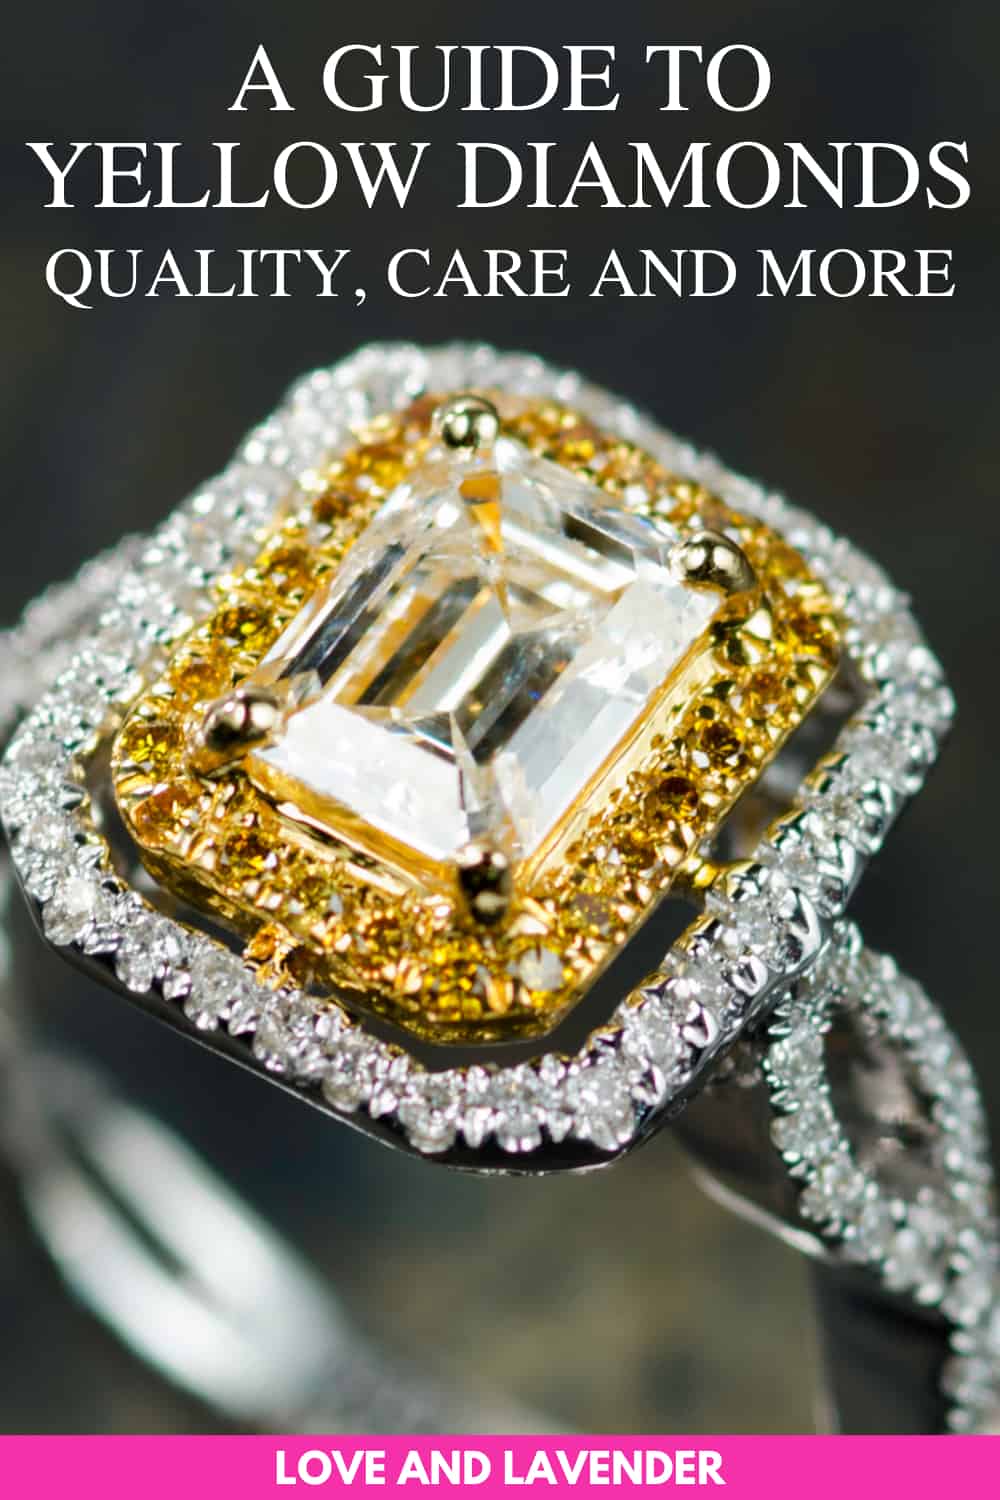 Our Guide to Yellow Diamonds - Pinterest pin